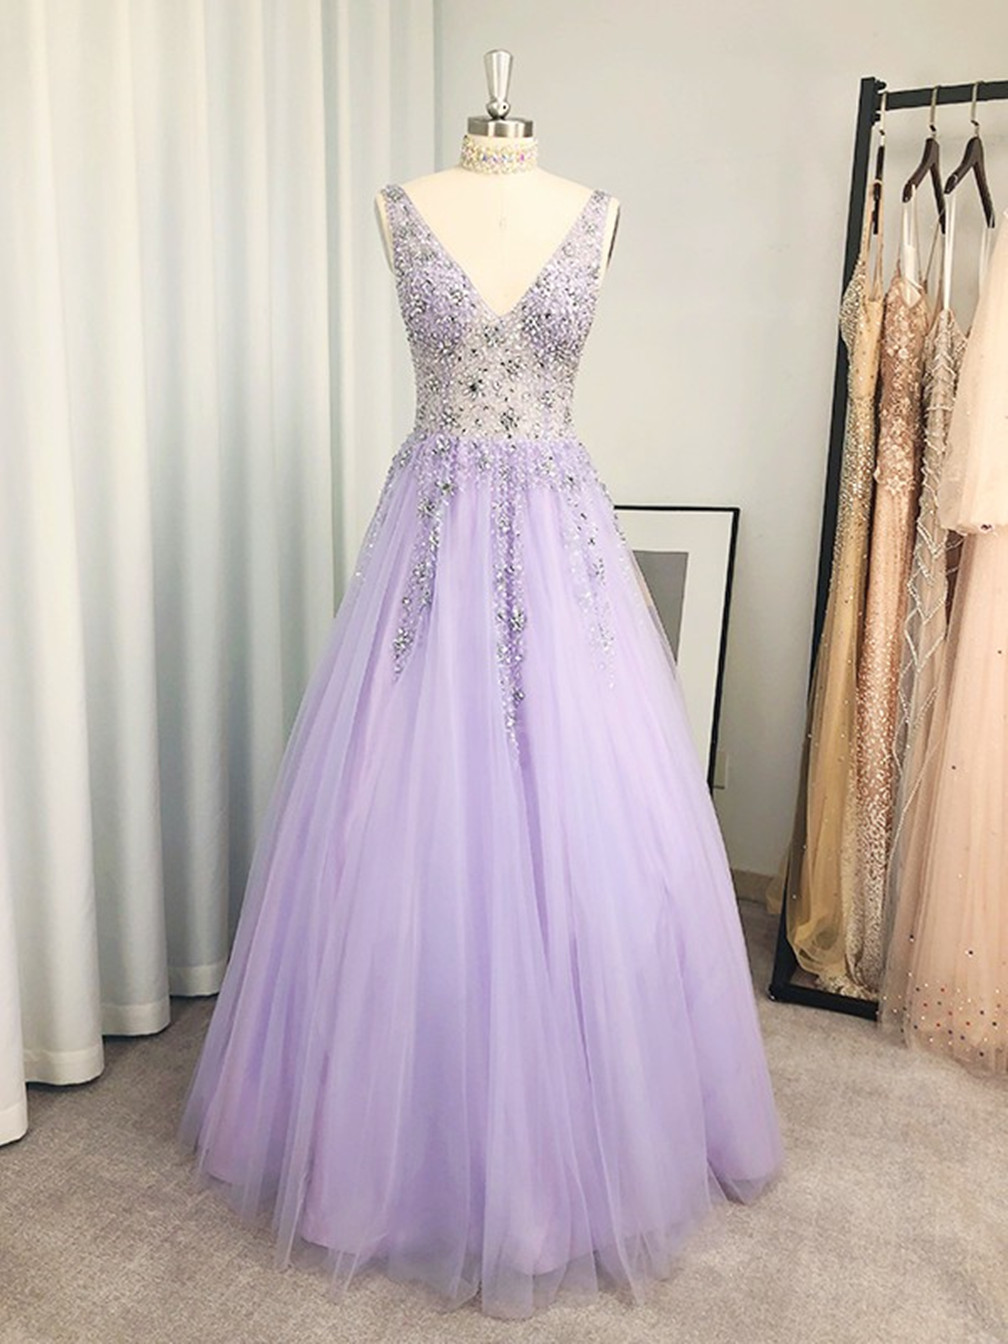 Women A-line/princess Beaded Prom Dresses Long V-neck Evening Gowns Sleeveless Formal Party Dress Yp023